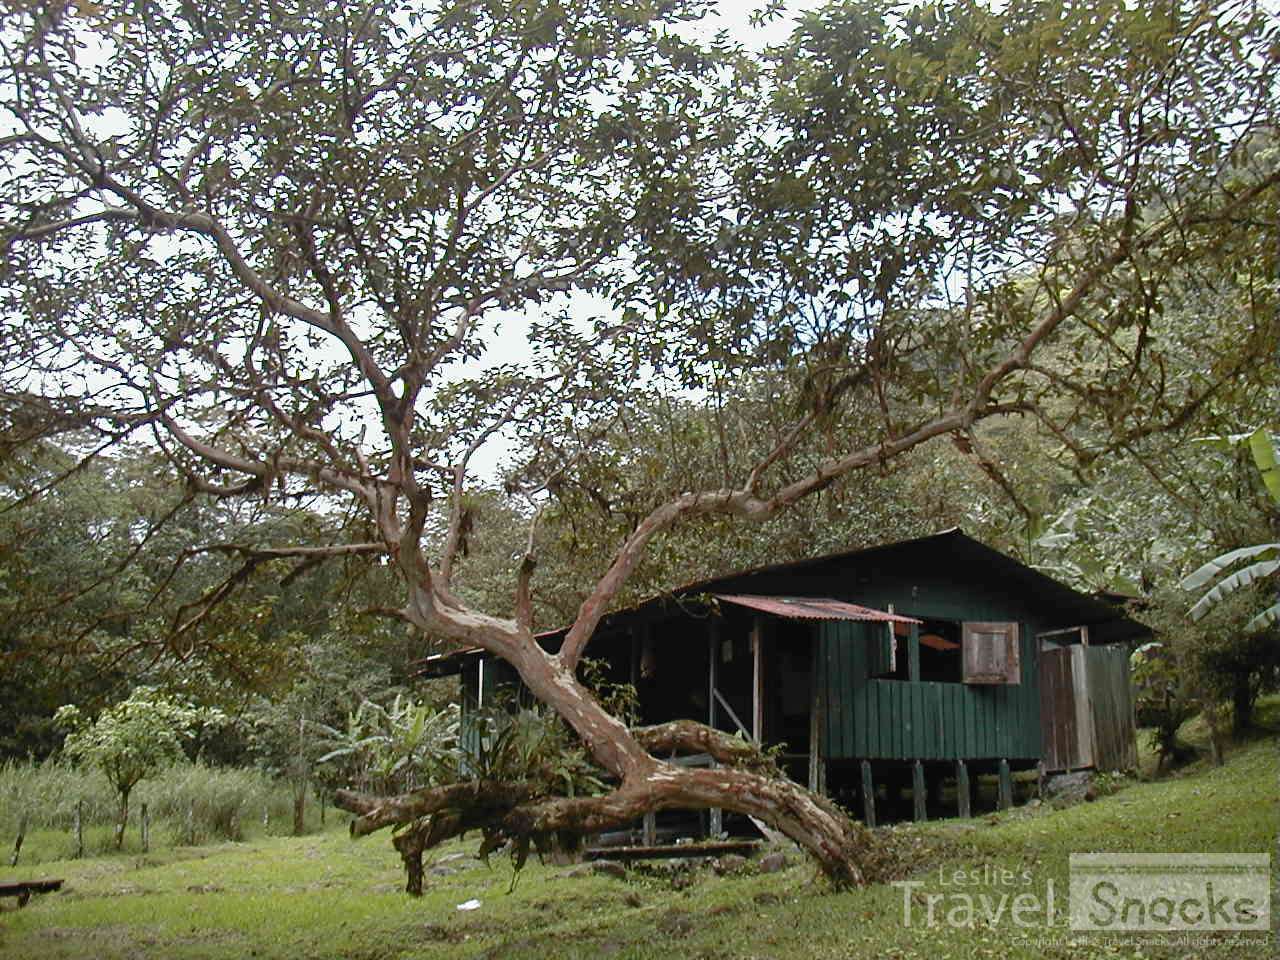 The Aleman Ranger Station inside Monte Verde Cloud Forest. We hiked in and stayed the night here.